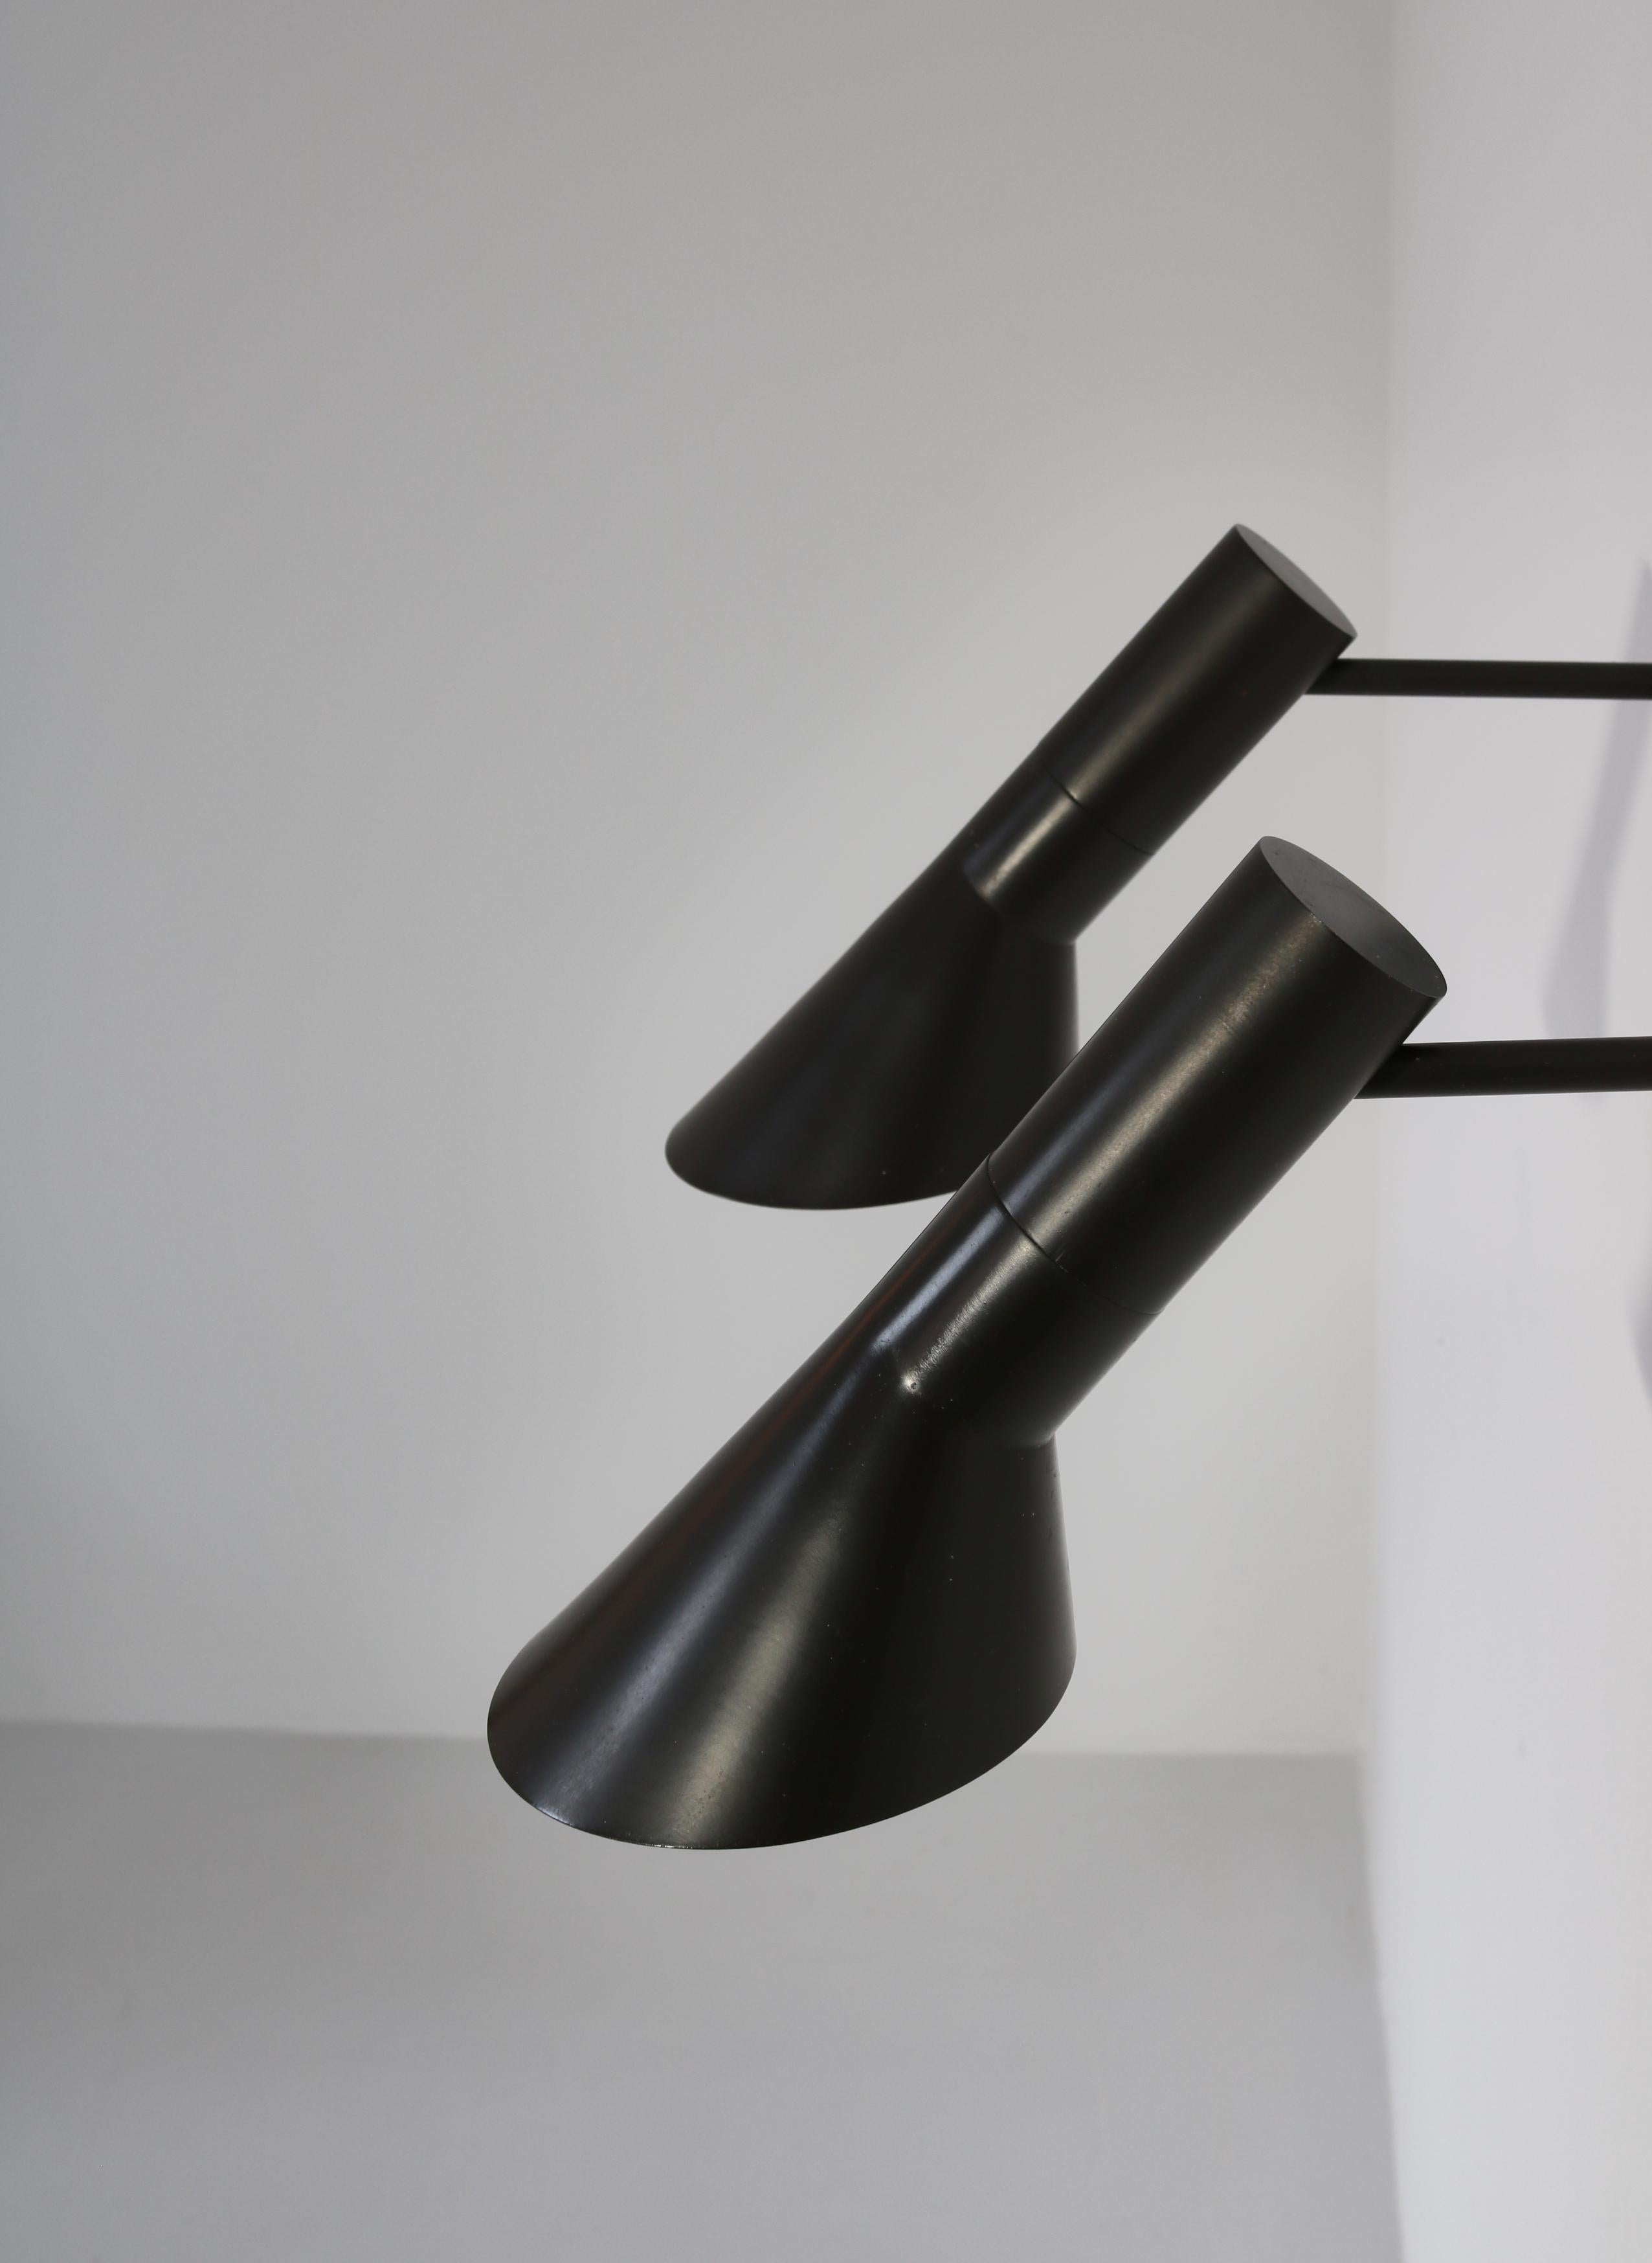 Early Arne Jacobsen Visor Wall Lamps Dark Brown Lacquer Louis Poulsen, 1957 For Sale 3